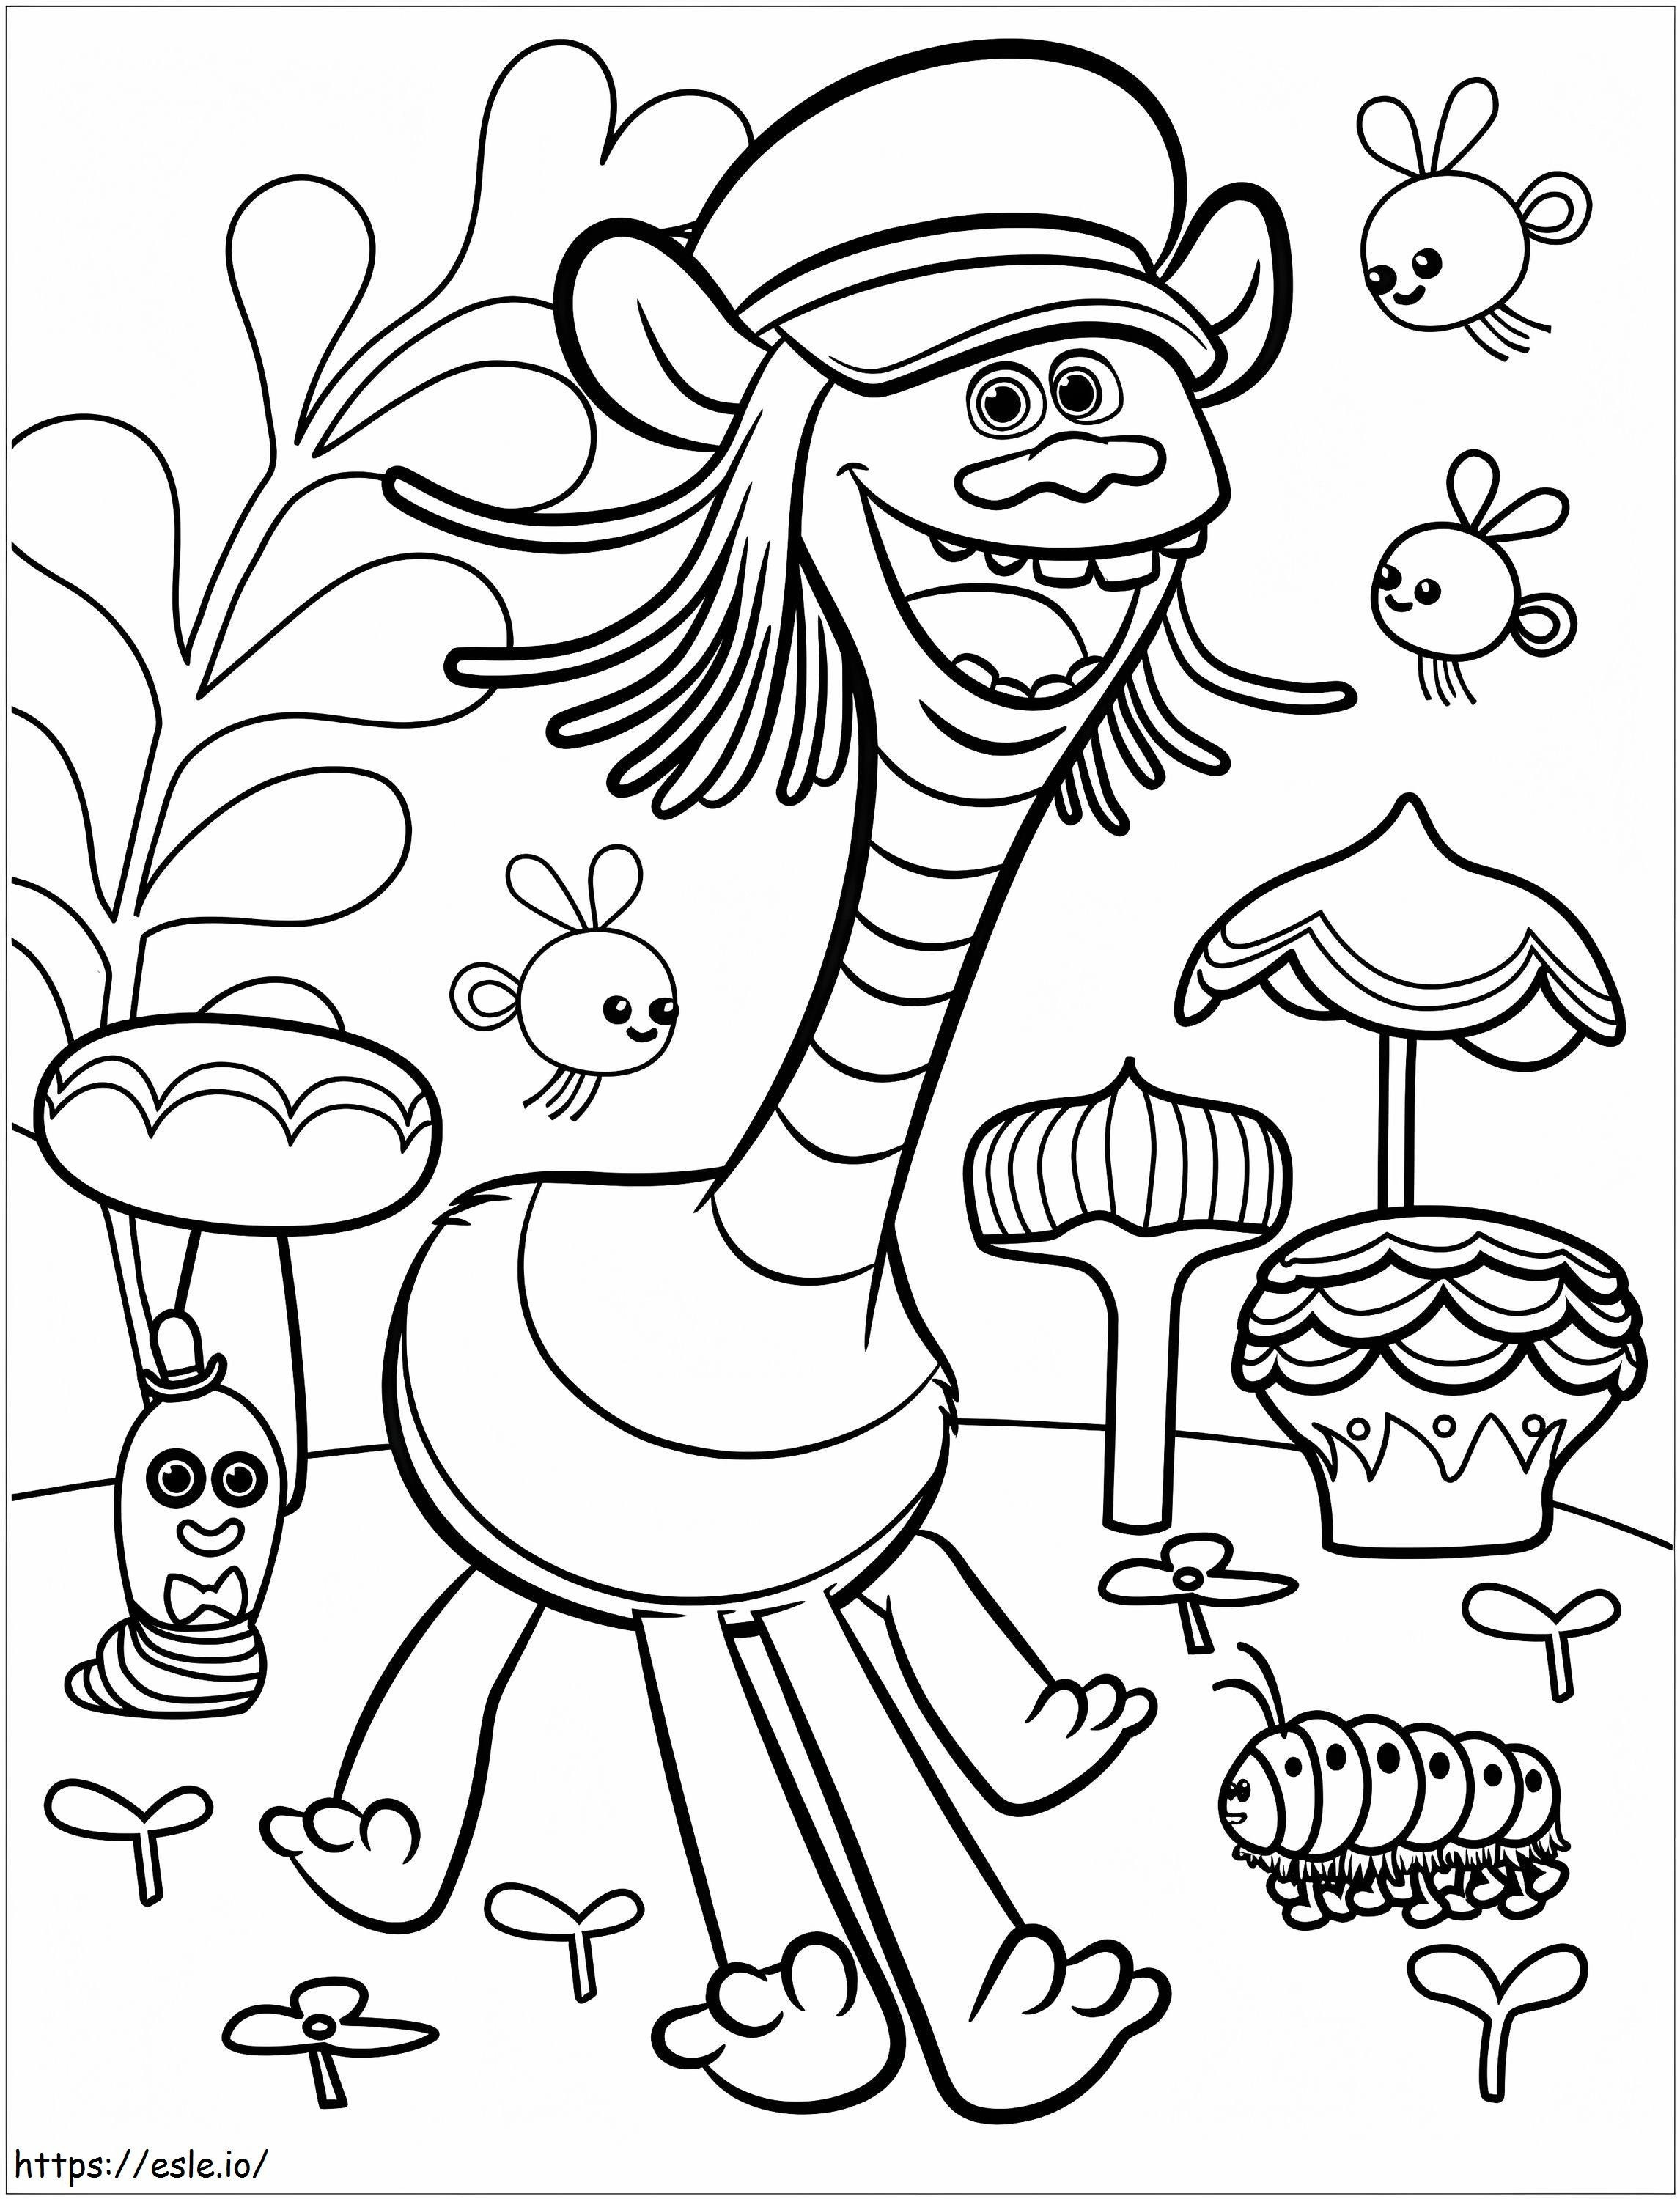 Cooper coloring page